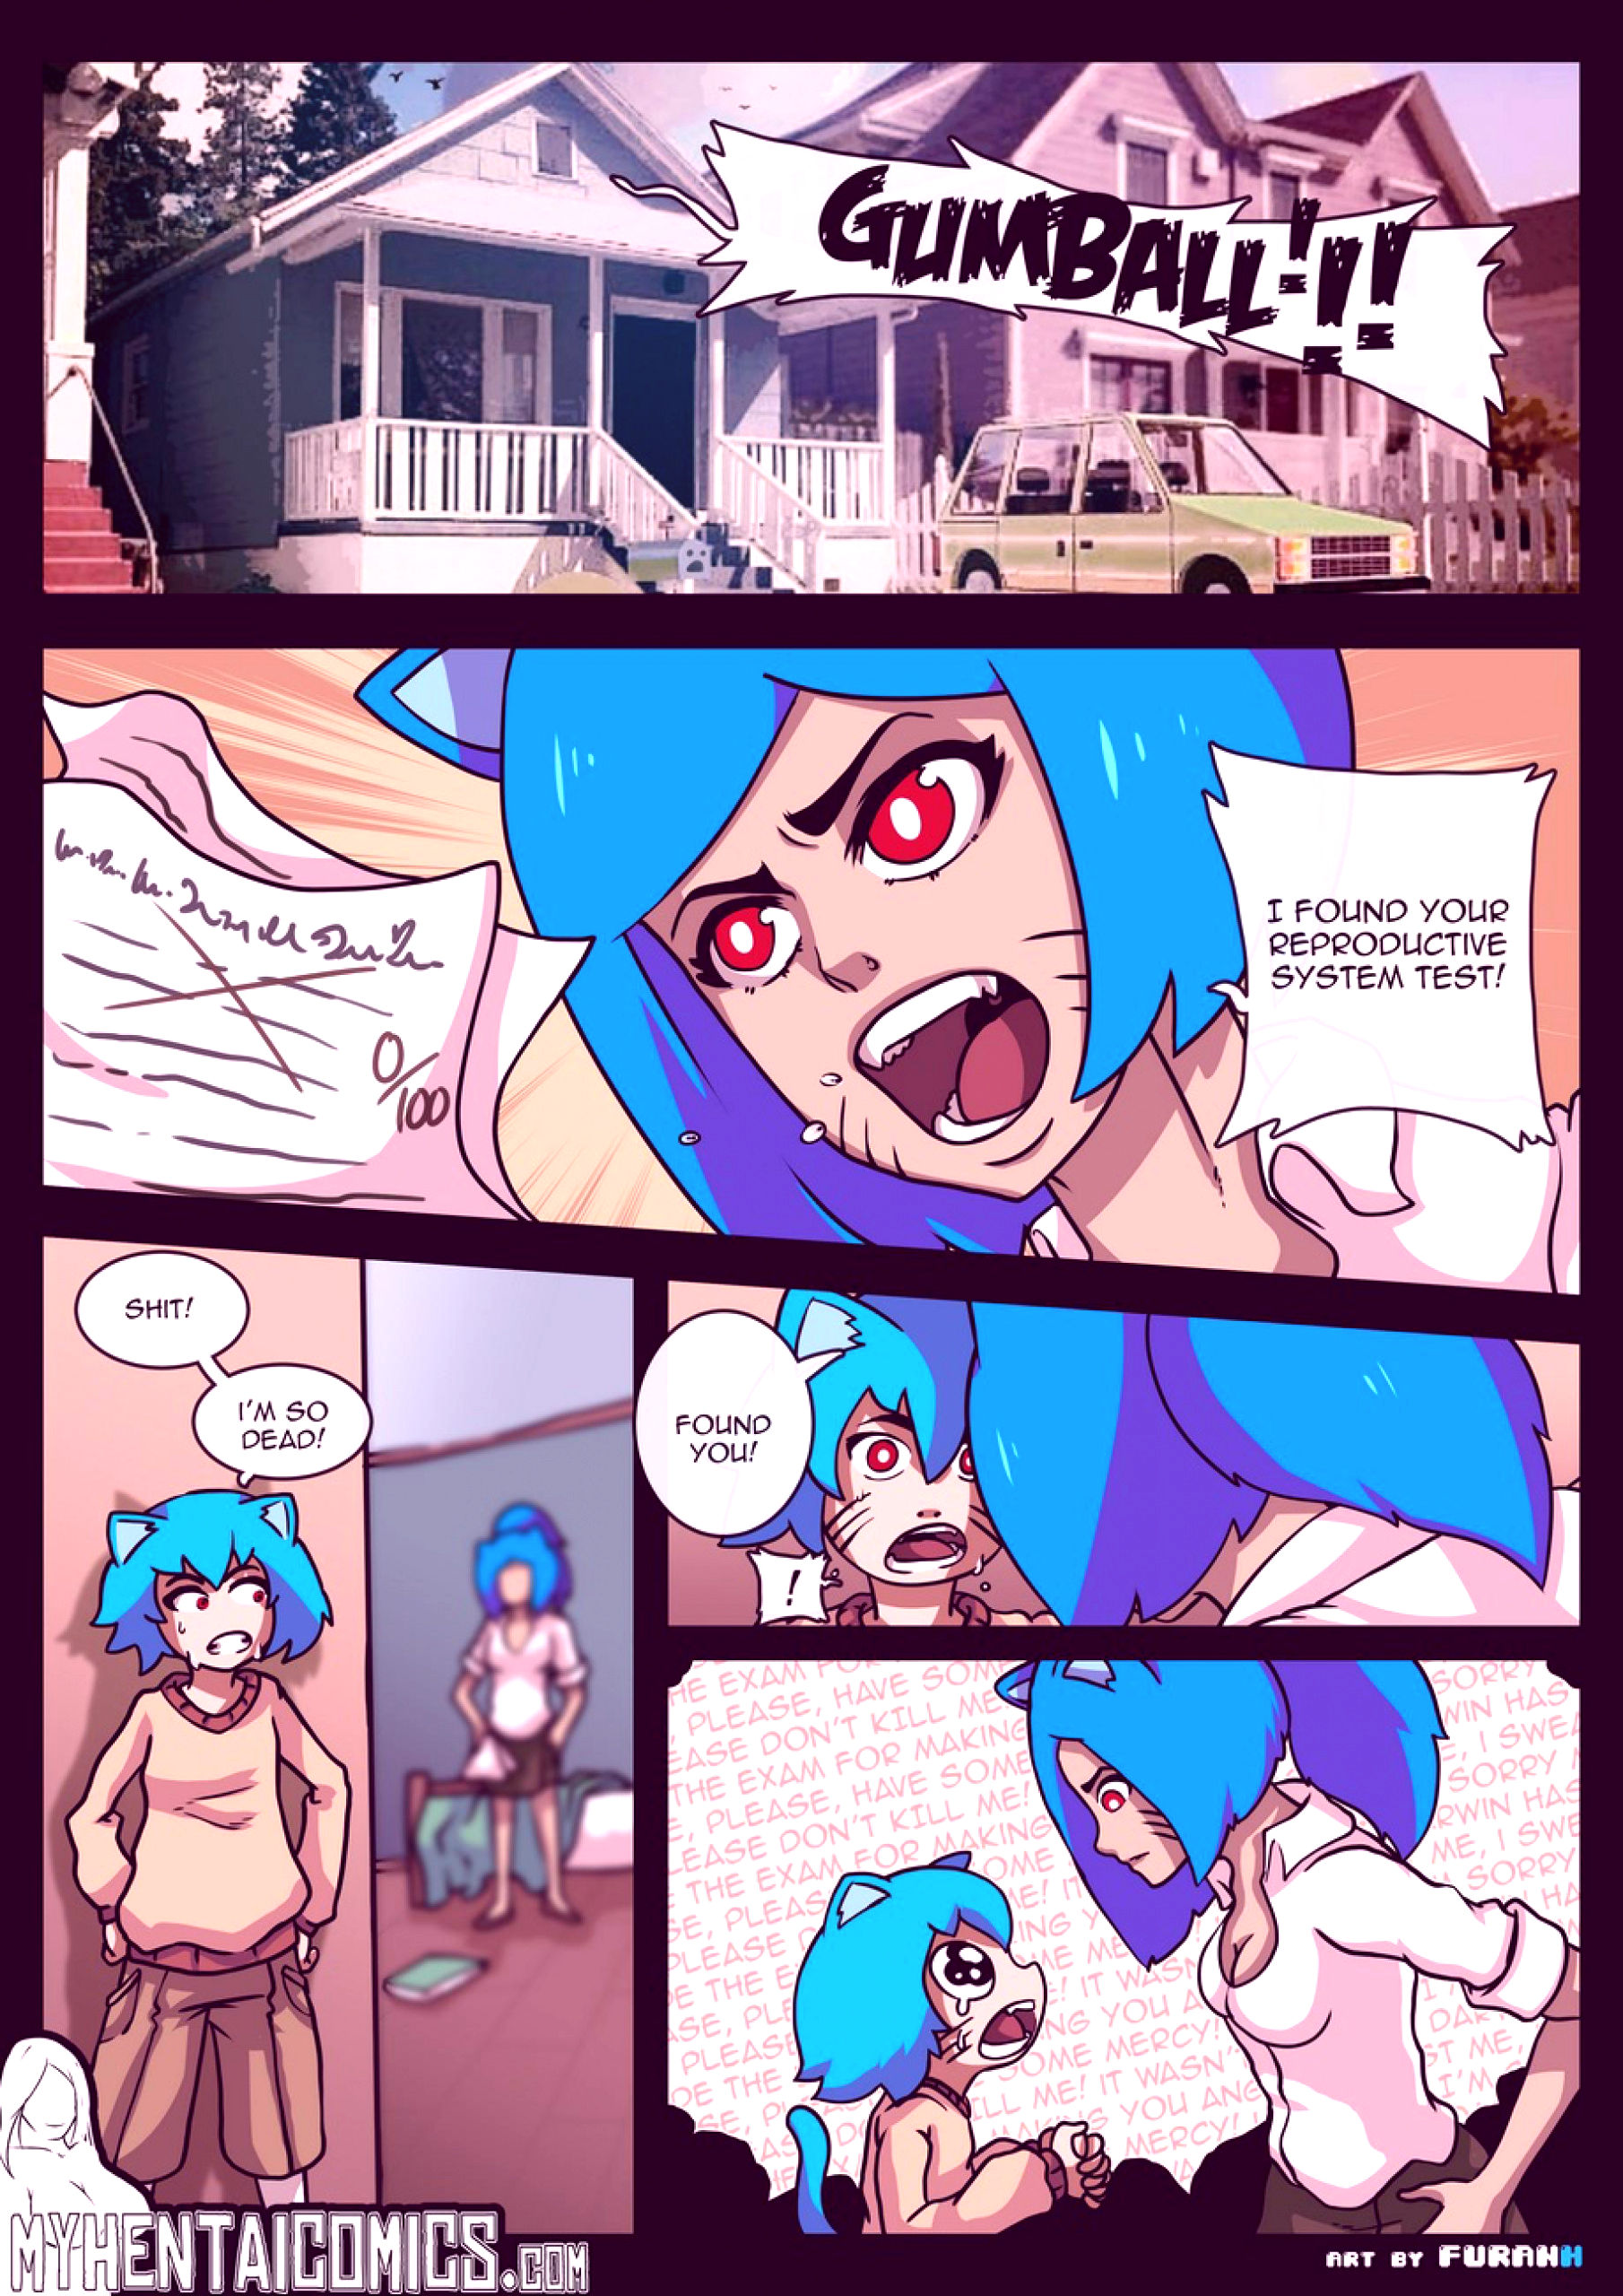 Gumball the amazing world of nicole biology lesson porn comic